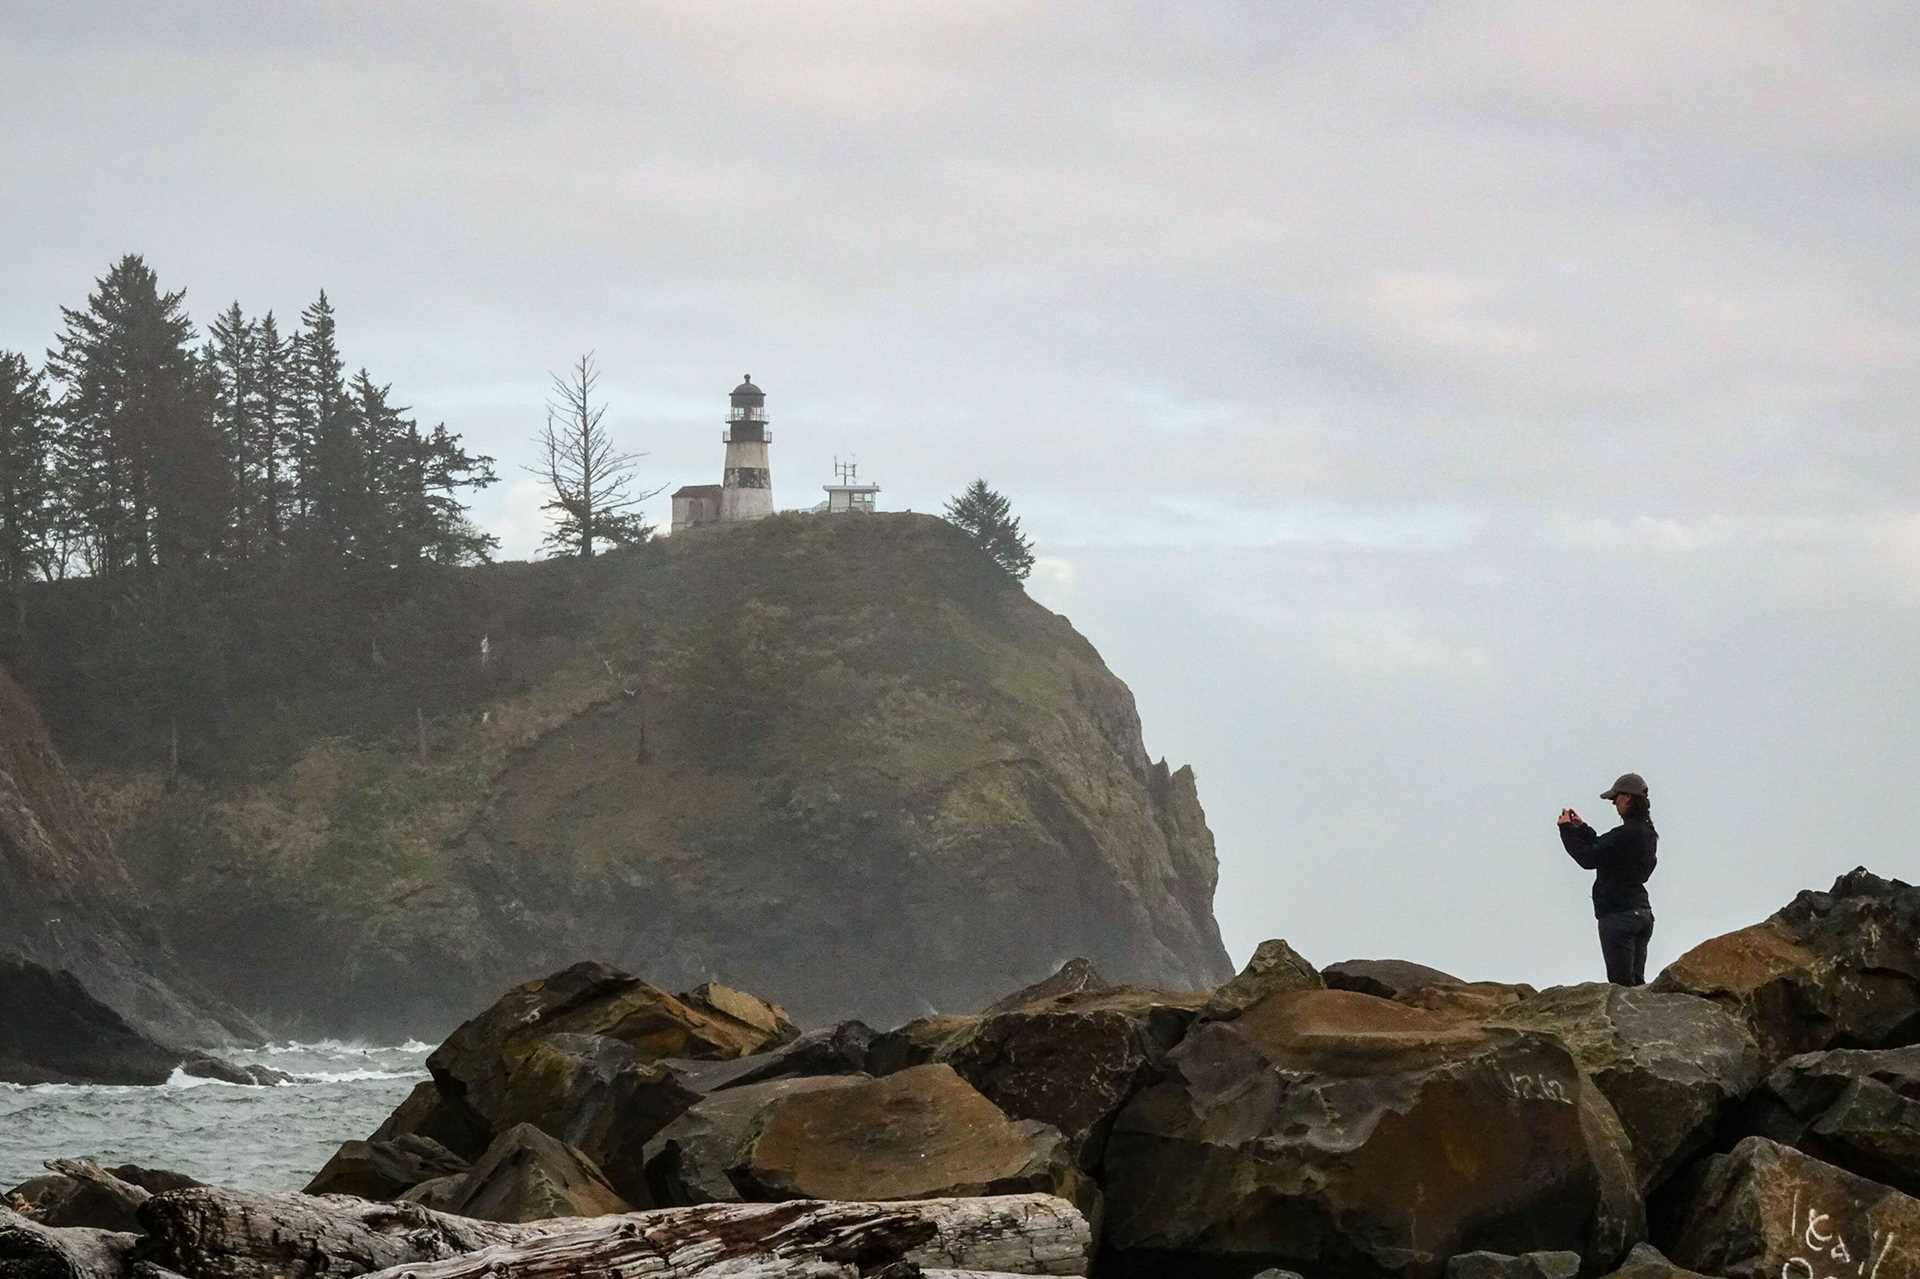 a woman stands on rocks and photographs a distant lighthouse